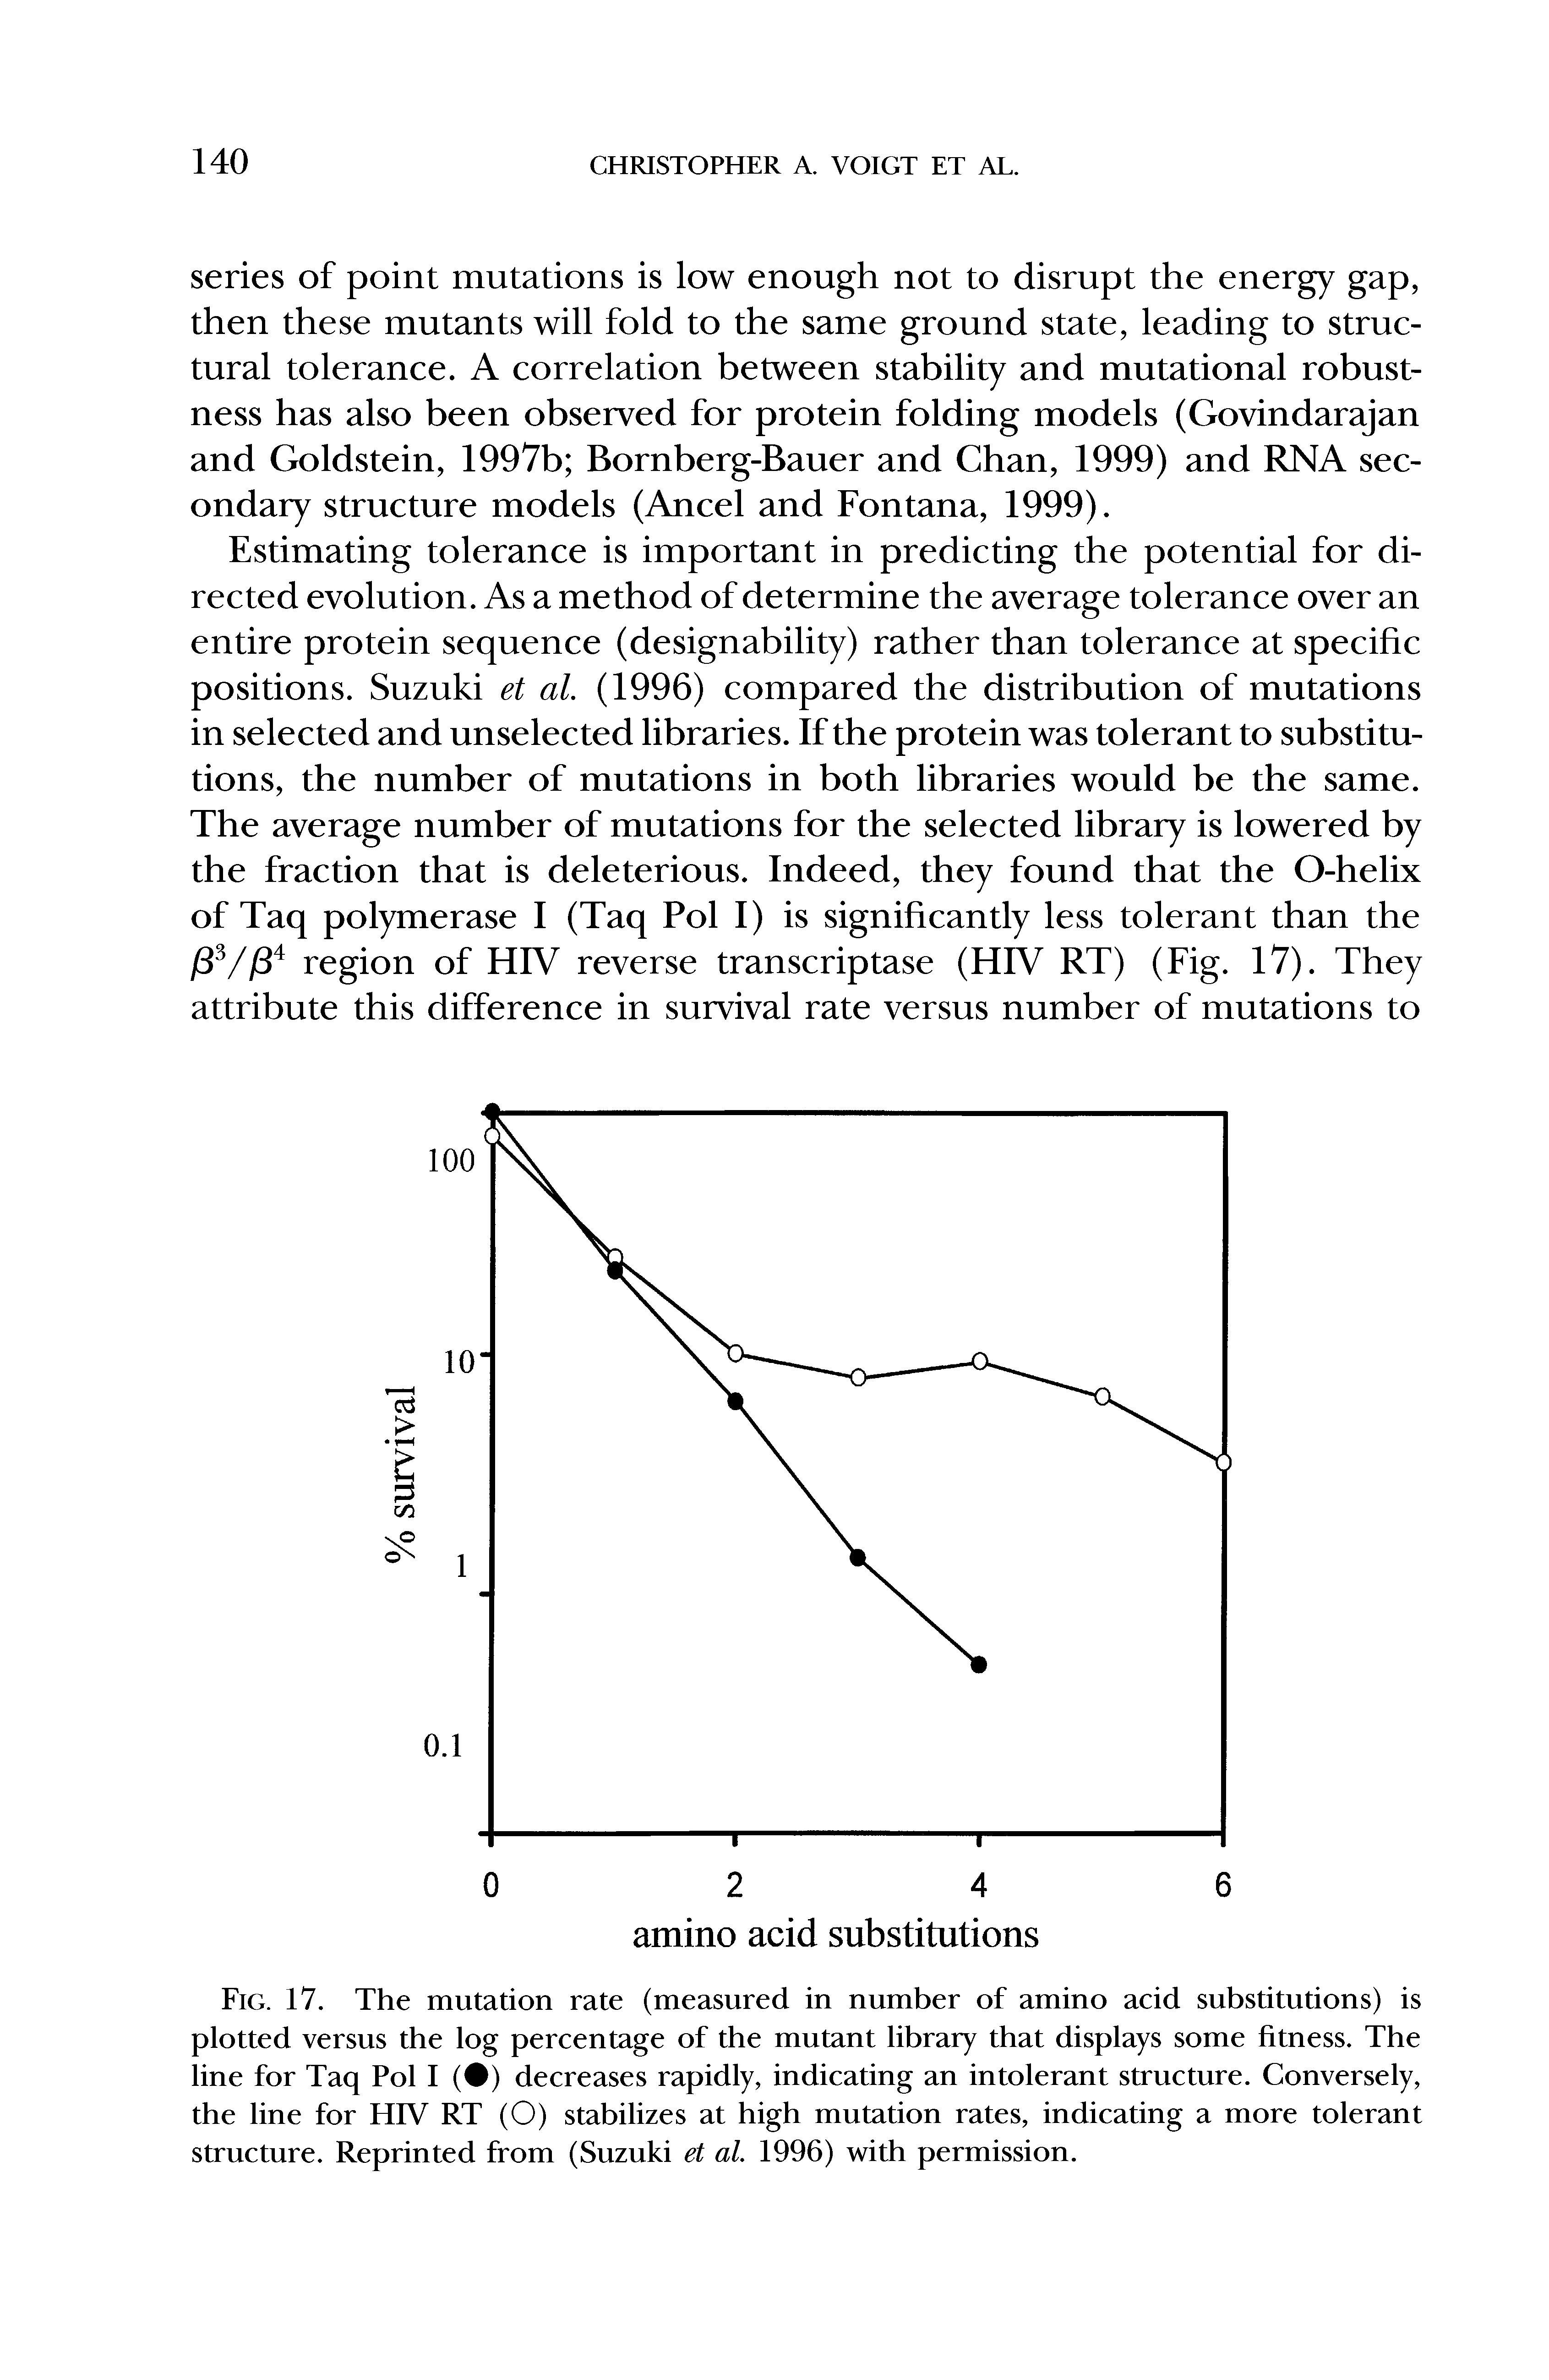 Fig. 17. The mutation rate (measured in number of amino acid substitutions) is plotted versus the log percentage of the mutant library that displays some fitness. The line for Taq Pol I ( ) decreases rapidly, indicating an intolerant structure. Conversely, the line for HIV RT (O) stabilizes at high mutation rates, indicating a more tolerant structure. Reprinted from (Suzuki et al. 1996) with permission.